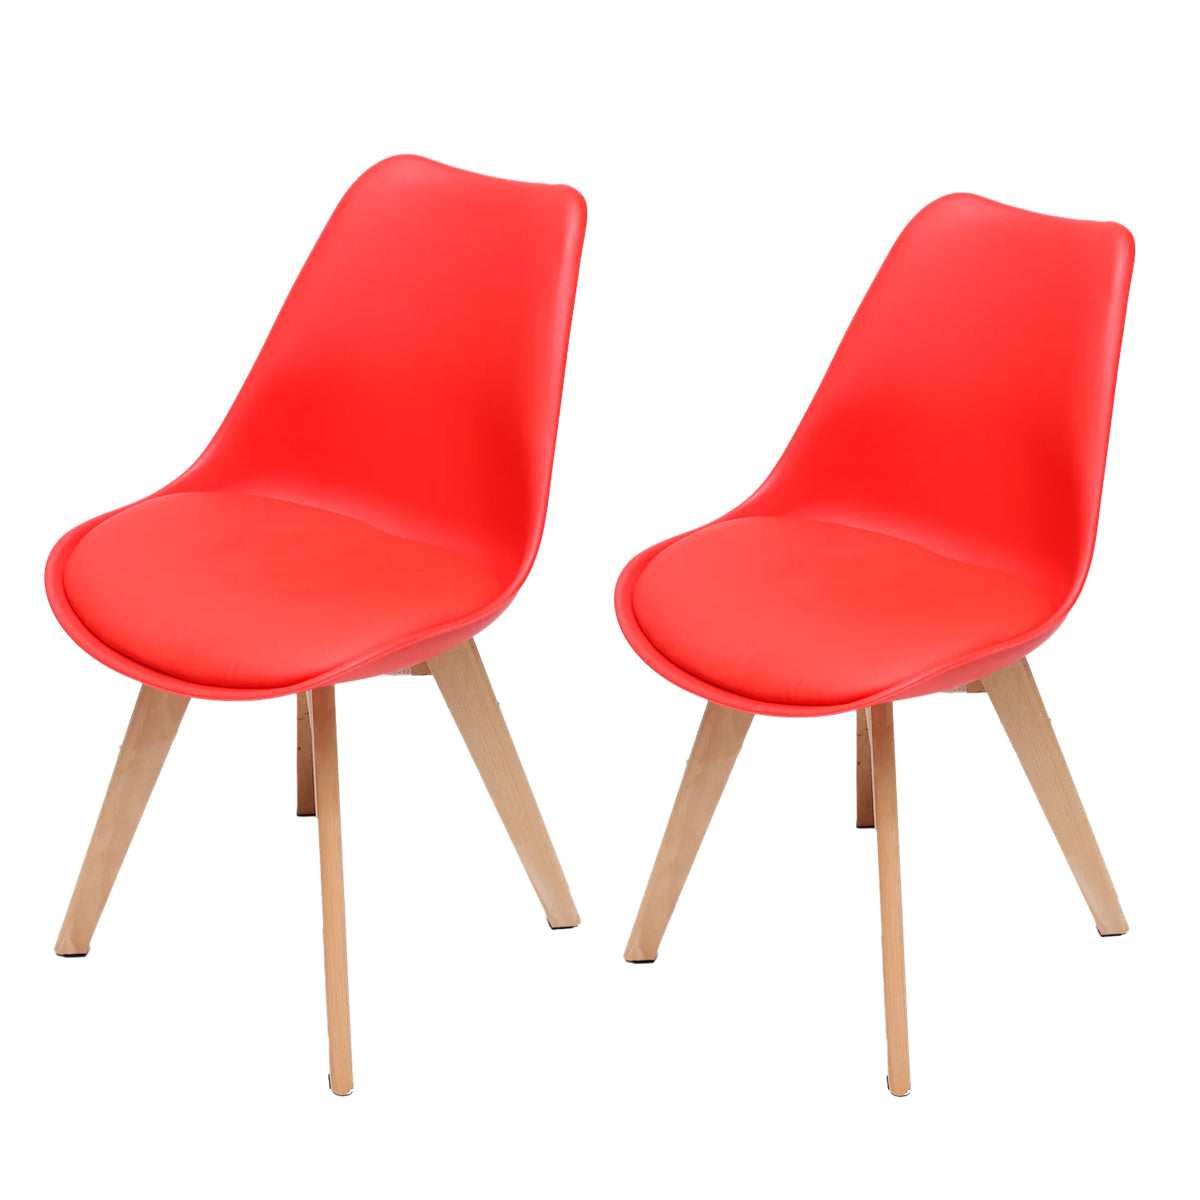 Gigma Red Chair Set of 2